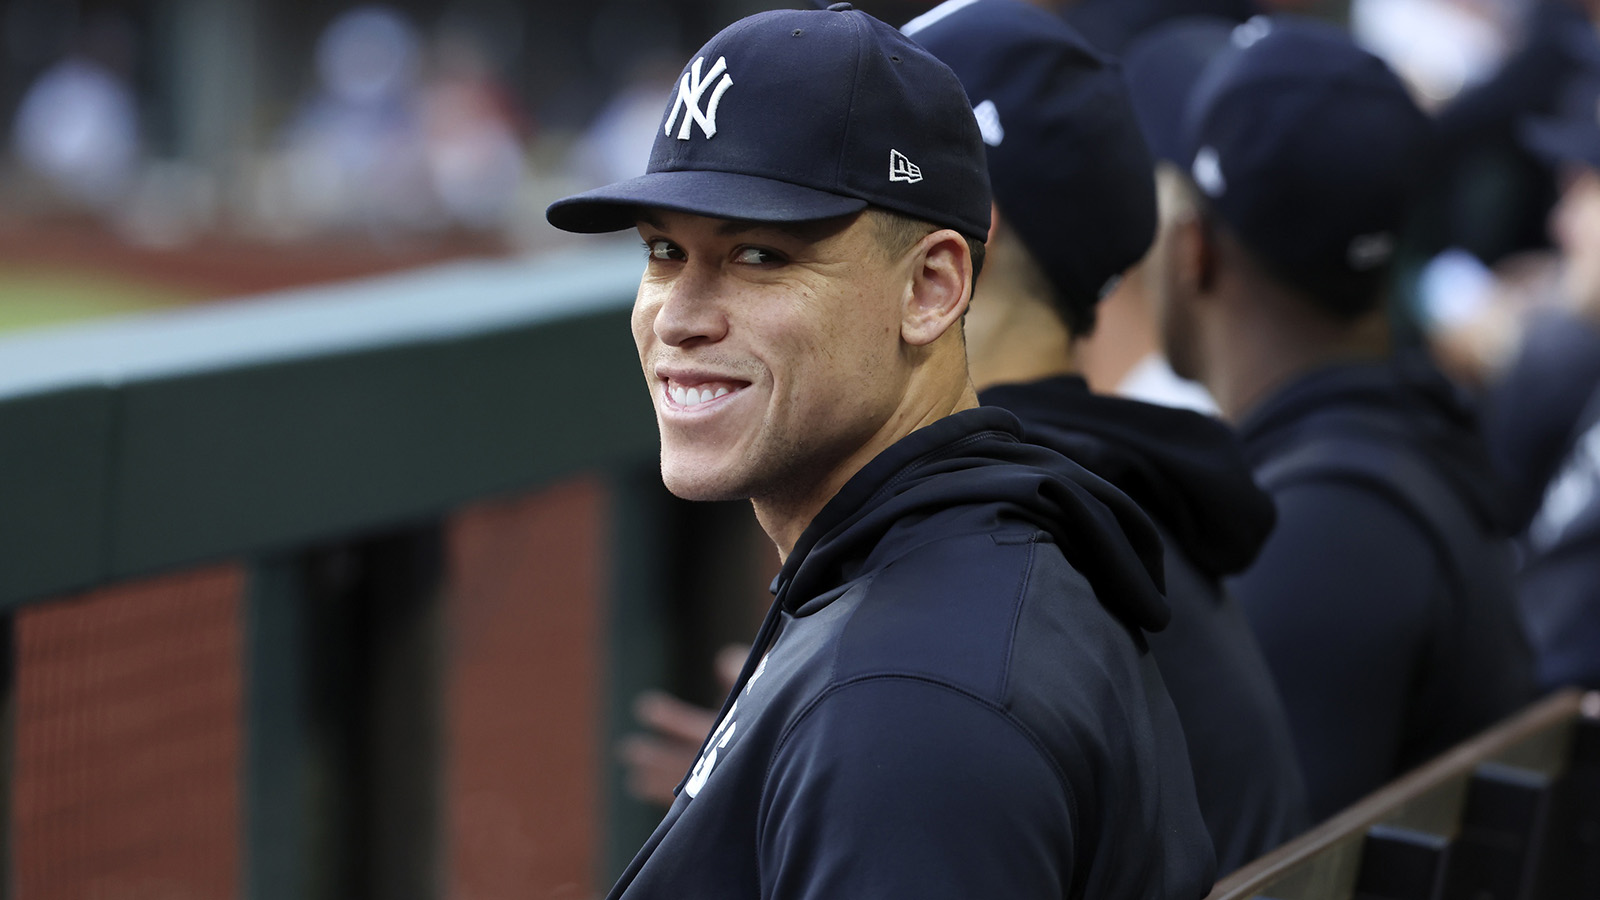 SF Giants' pursuit of Aaron Judge the talk of Day 2 at Winter Meetings